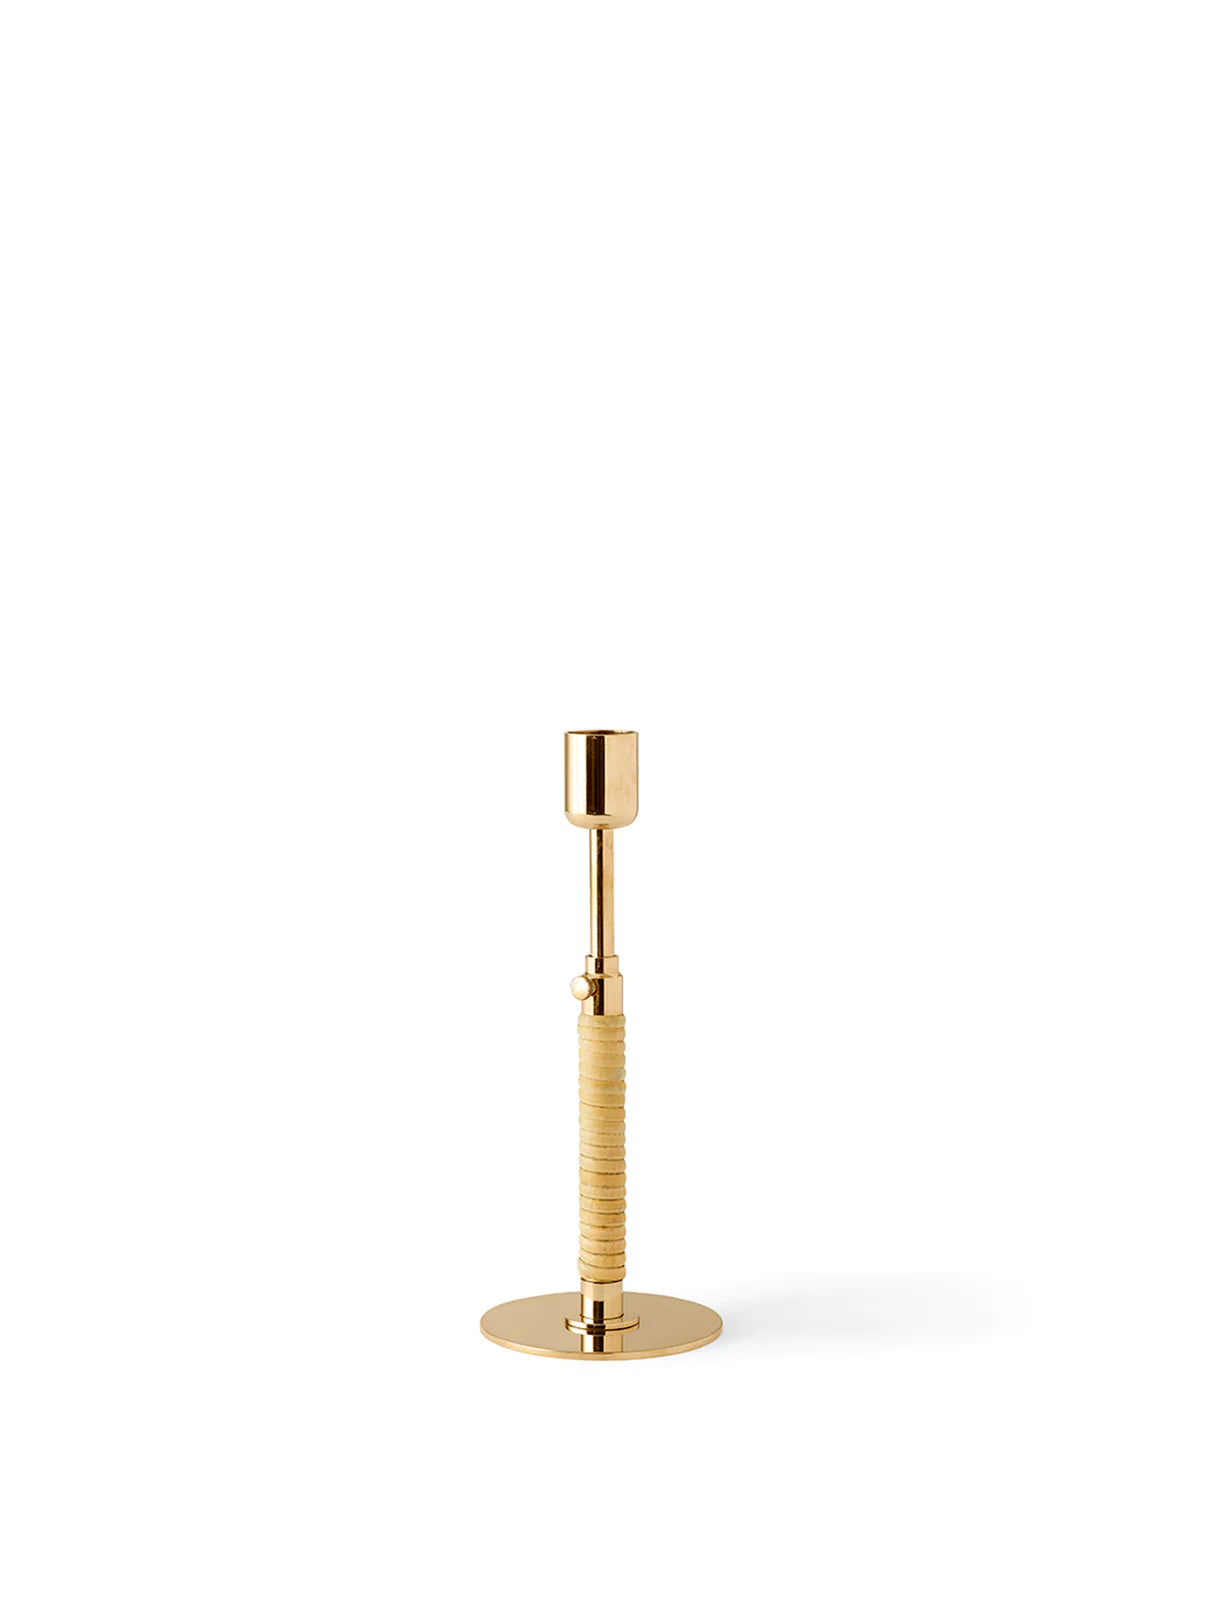 Audo DUCA Candle Holder